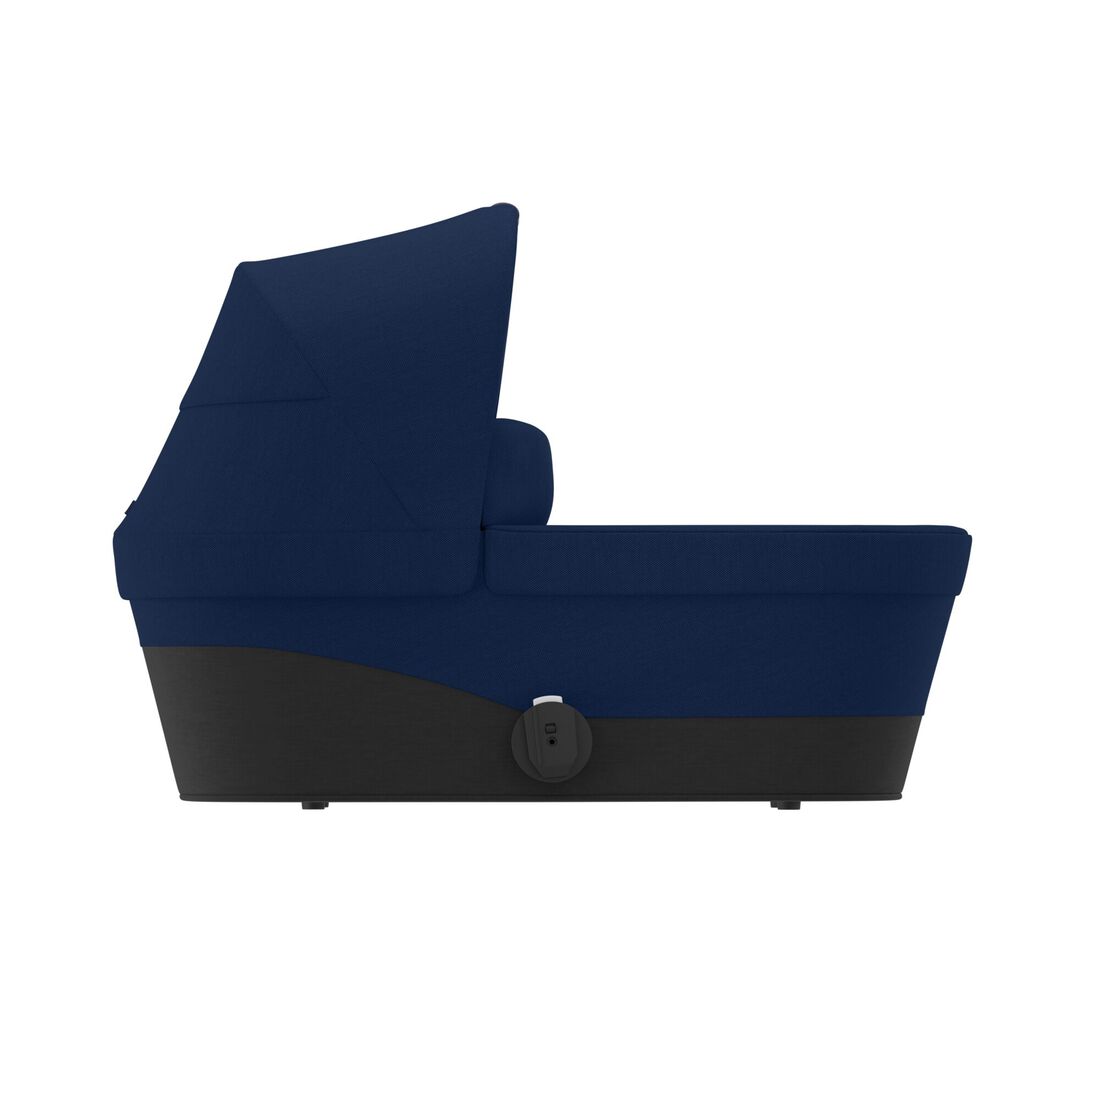 CYBEX Gazelle S Cot - Navy Blue in Navy Blue large image number 3